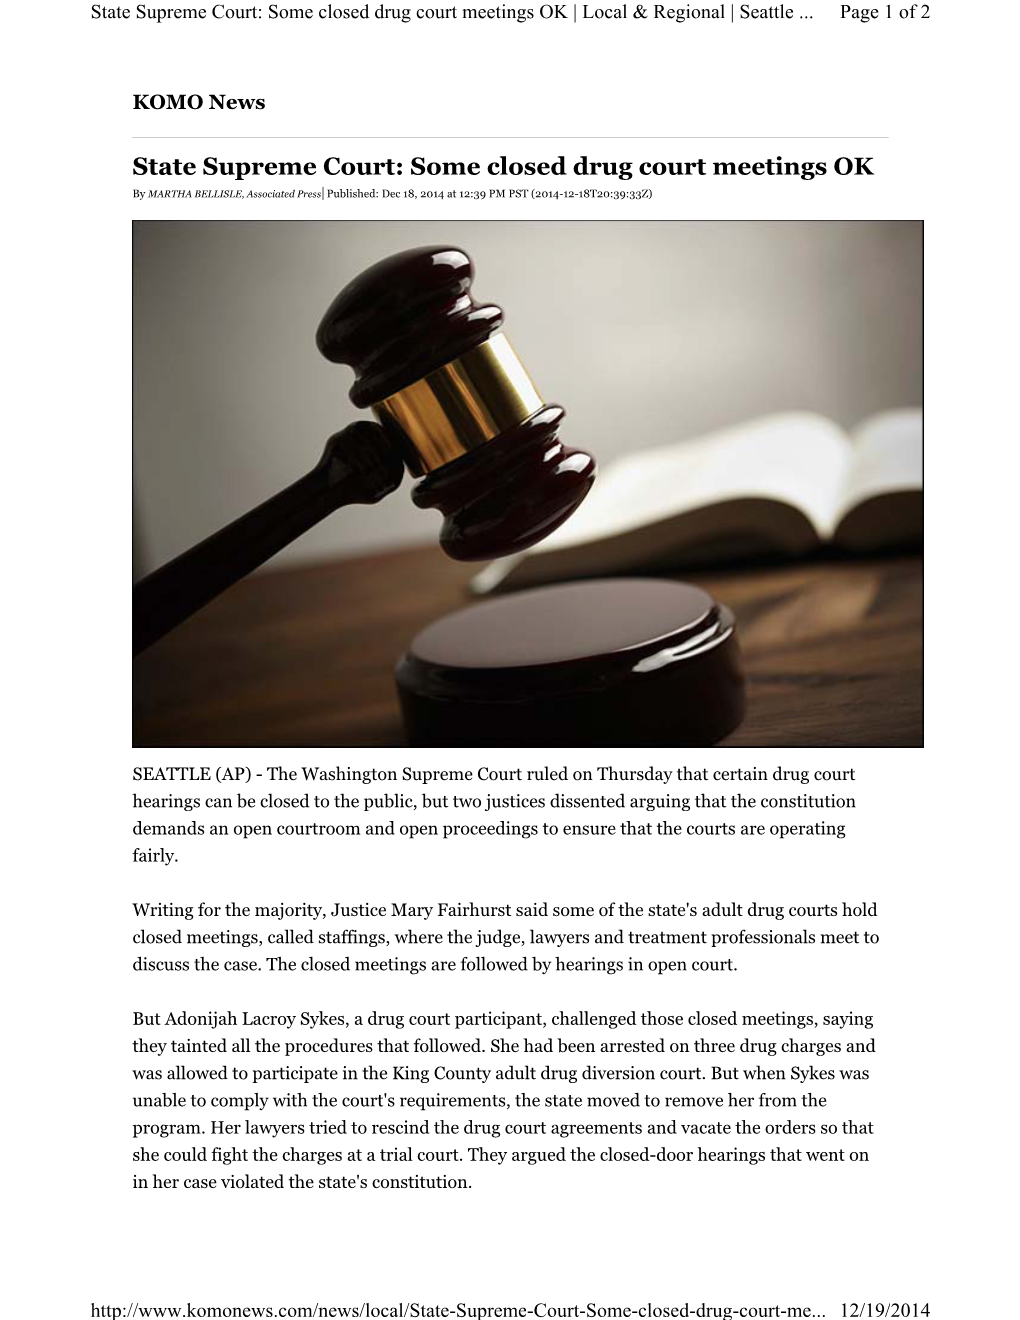 State Supreme Court: Some Closed Drug Court Meetings OK | Local & Regional | Seattle